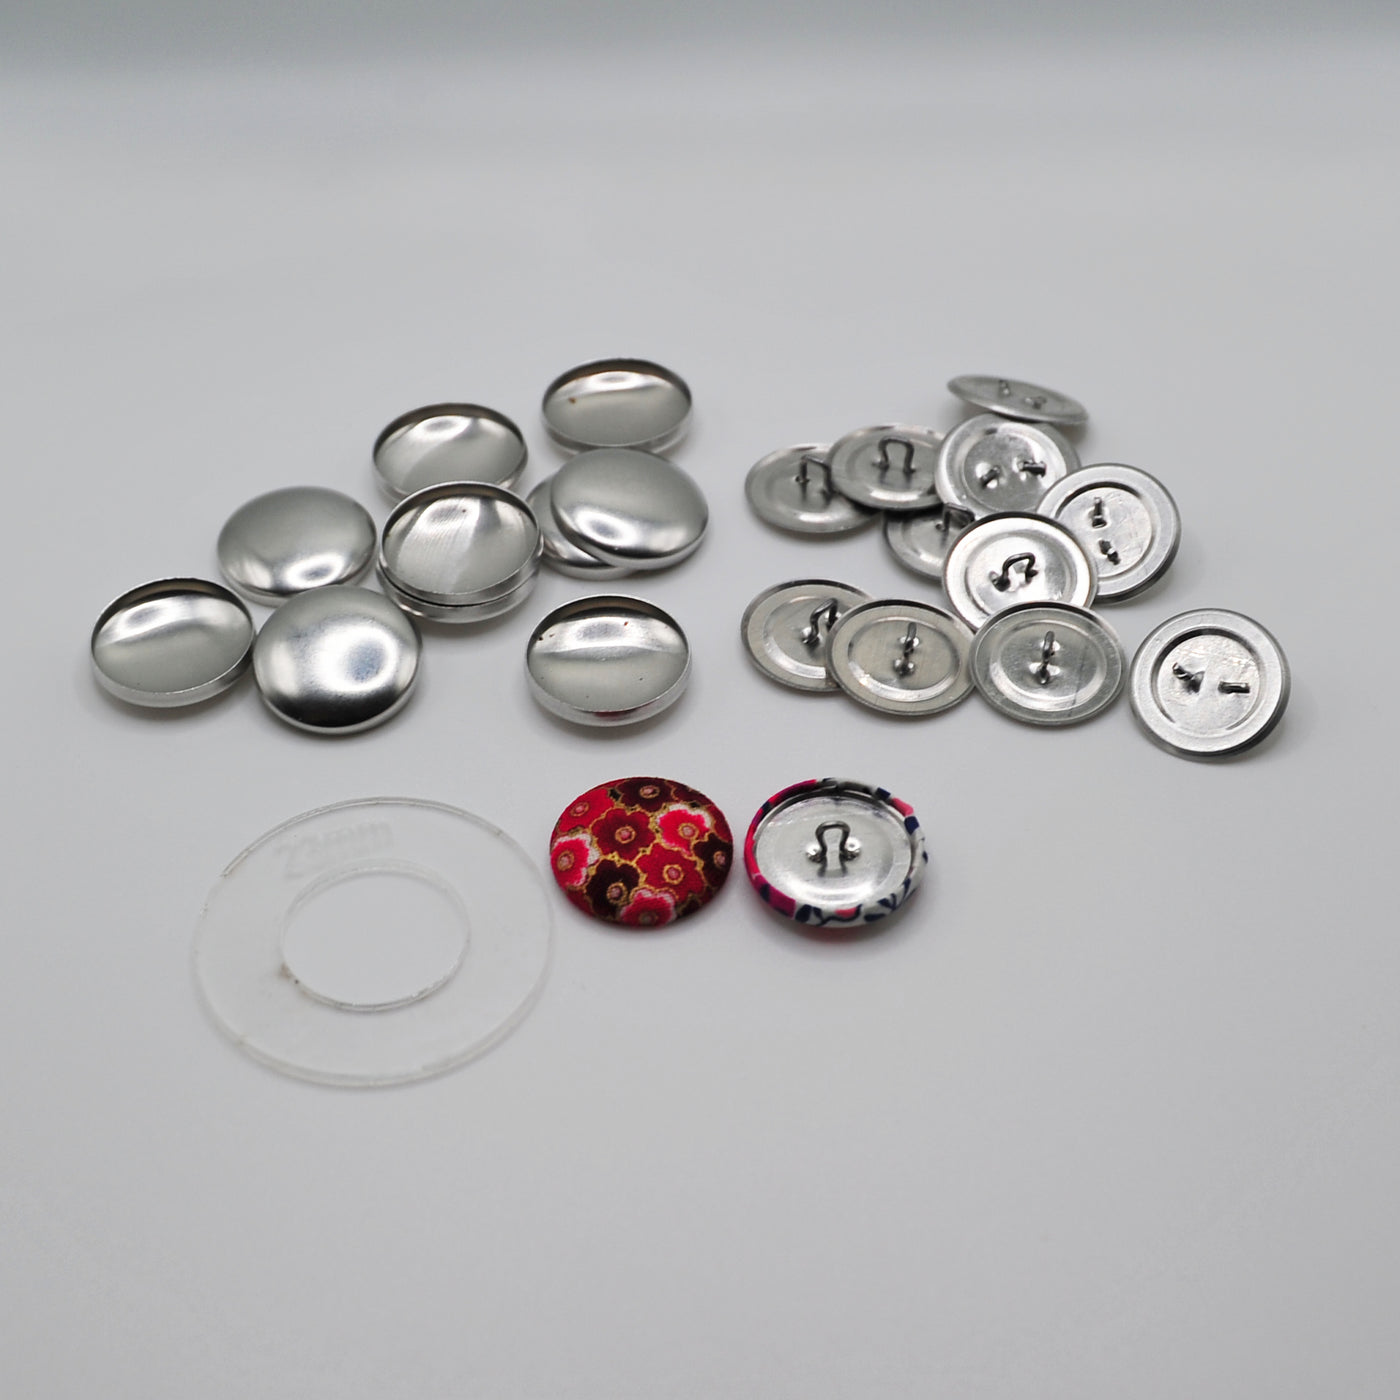 23mm (7/8 Inch) (Size 36 US) Self Cover Buttons